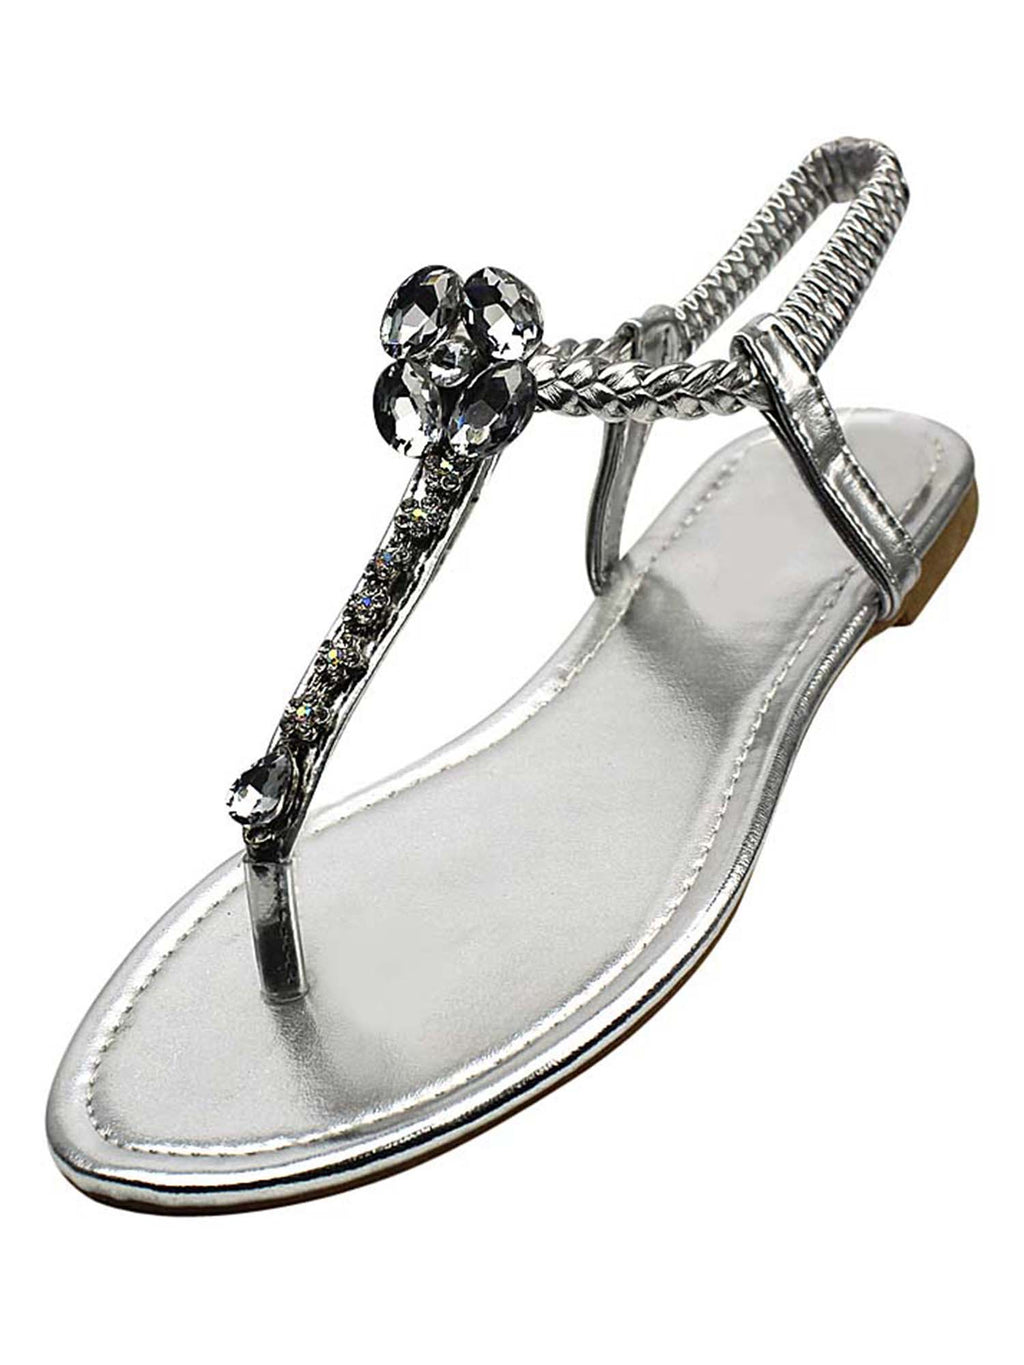 Womens Flat Thong Sandals With Crystals